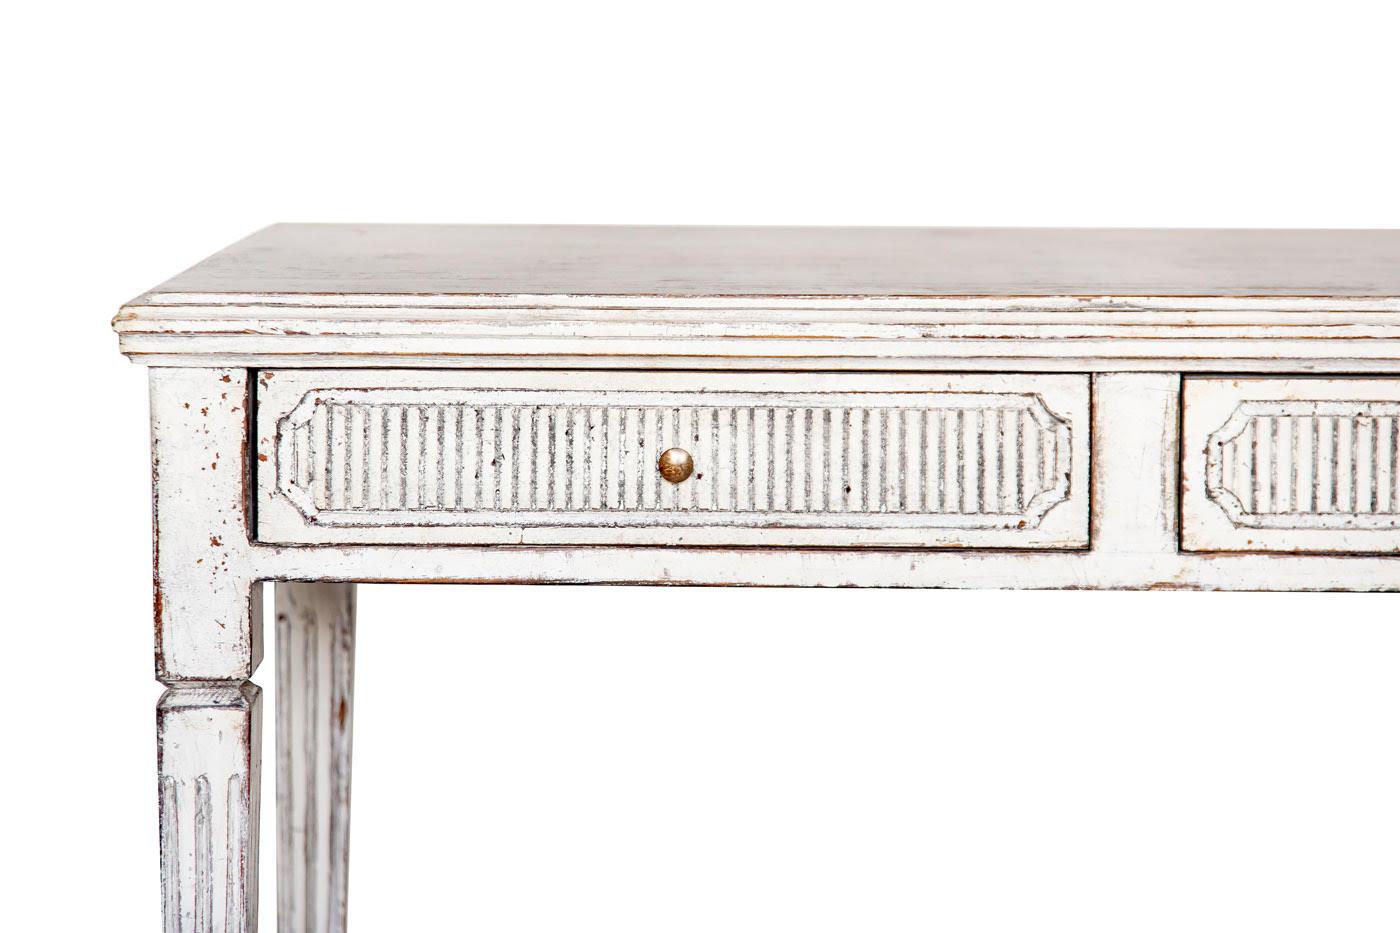 Shipping update - please message us directly with your city and zip/postcode for a delivery cost to your location on this item - please do not request shipping from 1st dibs

Rare Antique Gustavian console writing desk with double drawers circa